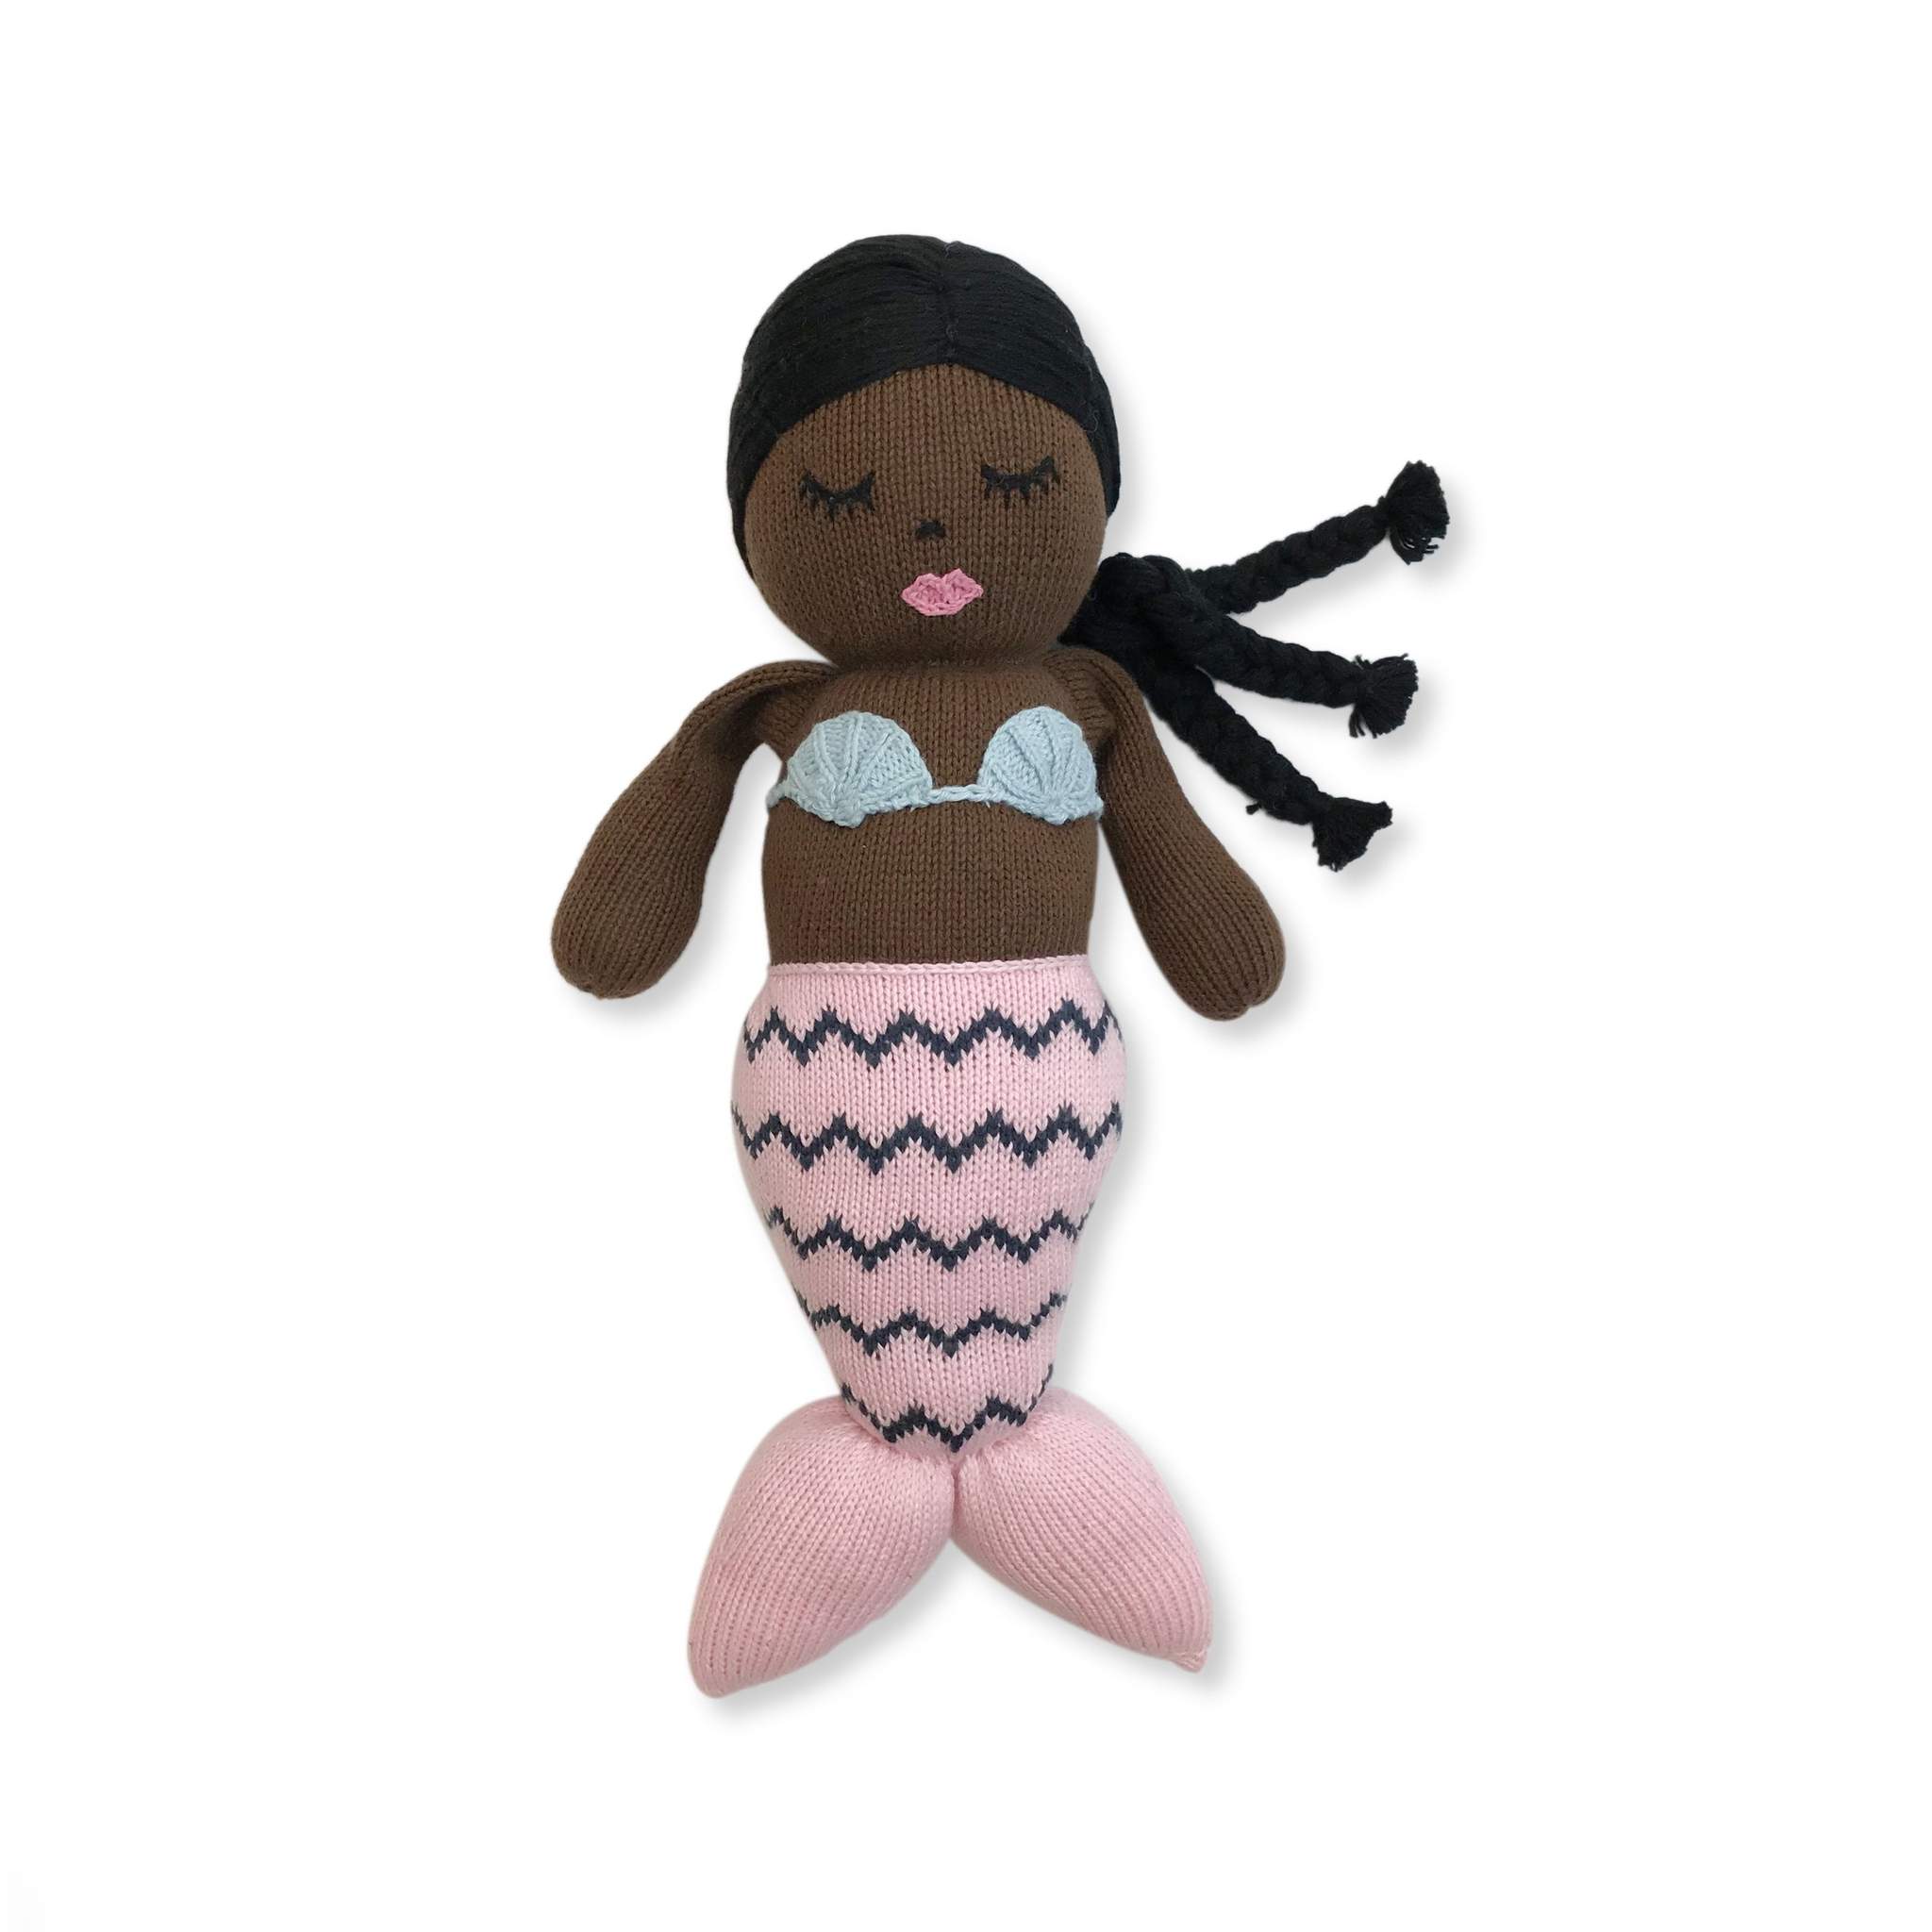 Mermaid toy from finn+emma organic baby and toddler clothes and gear